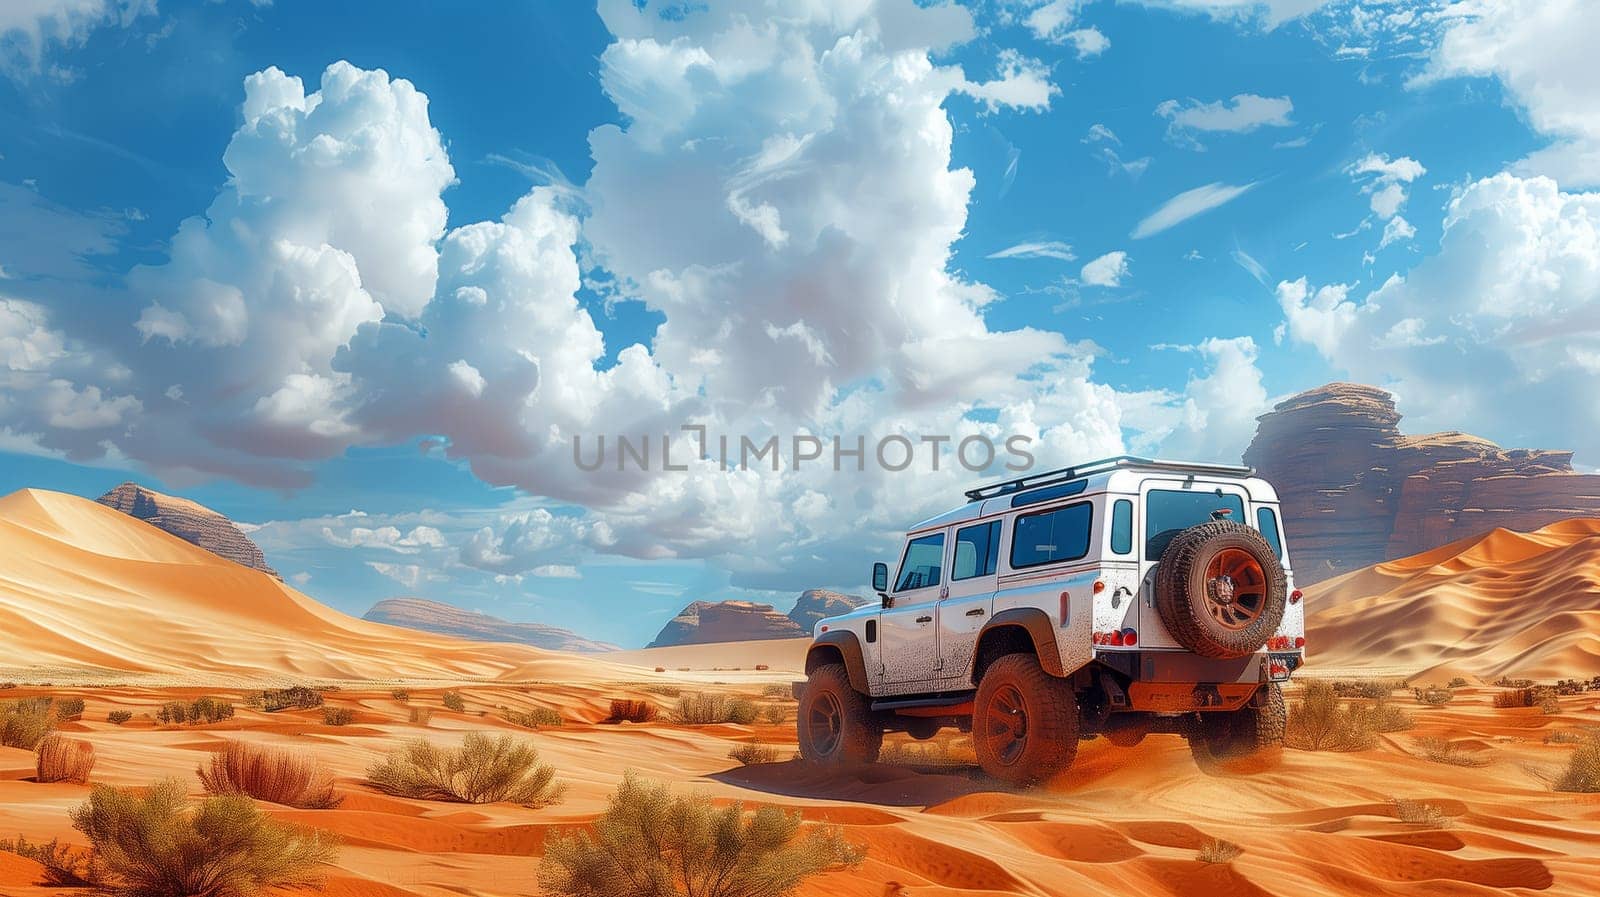 A white jeep travels along a dusty desert road under a clear sky by richwolf